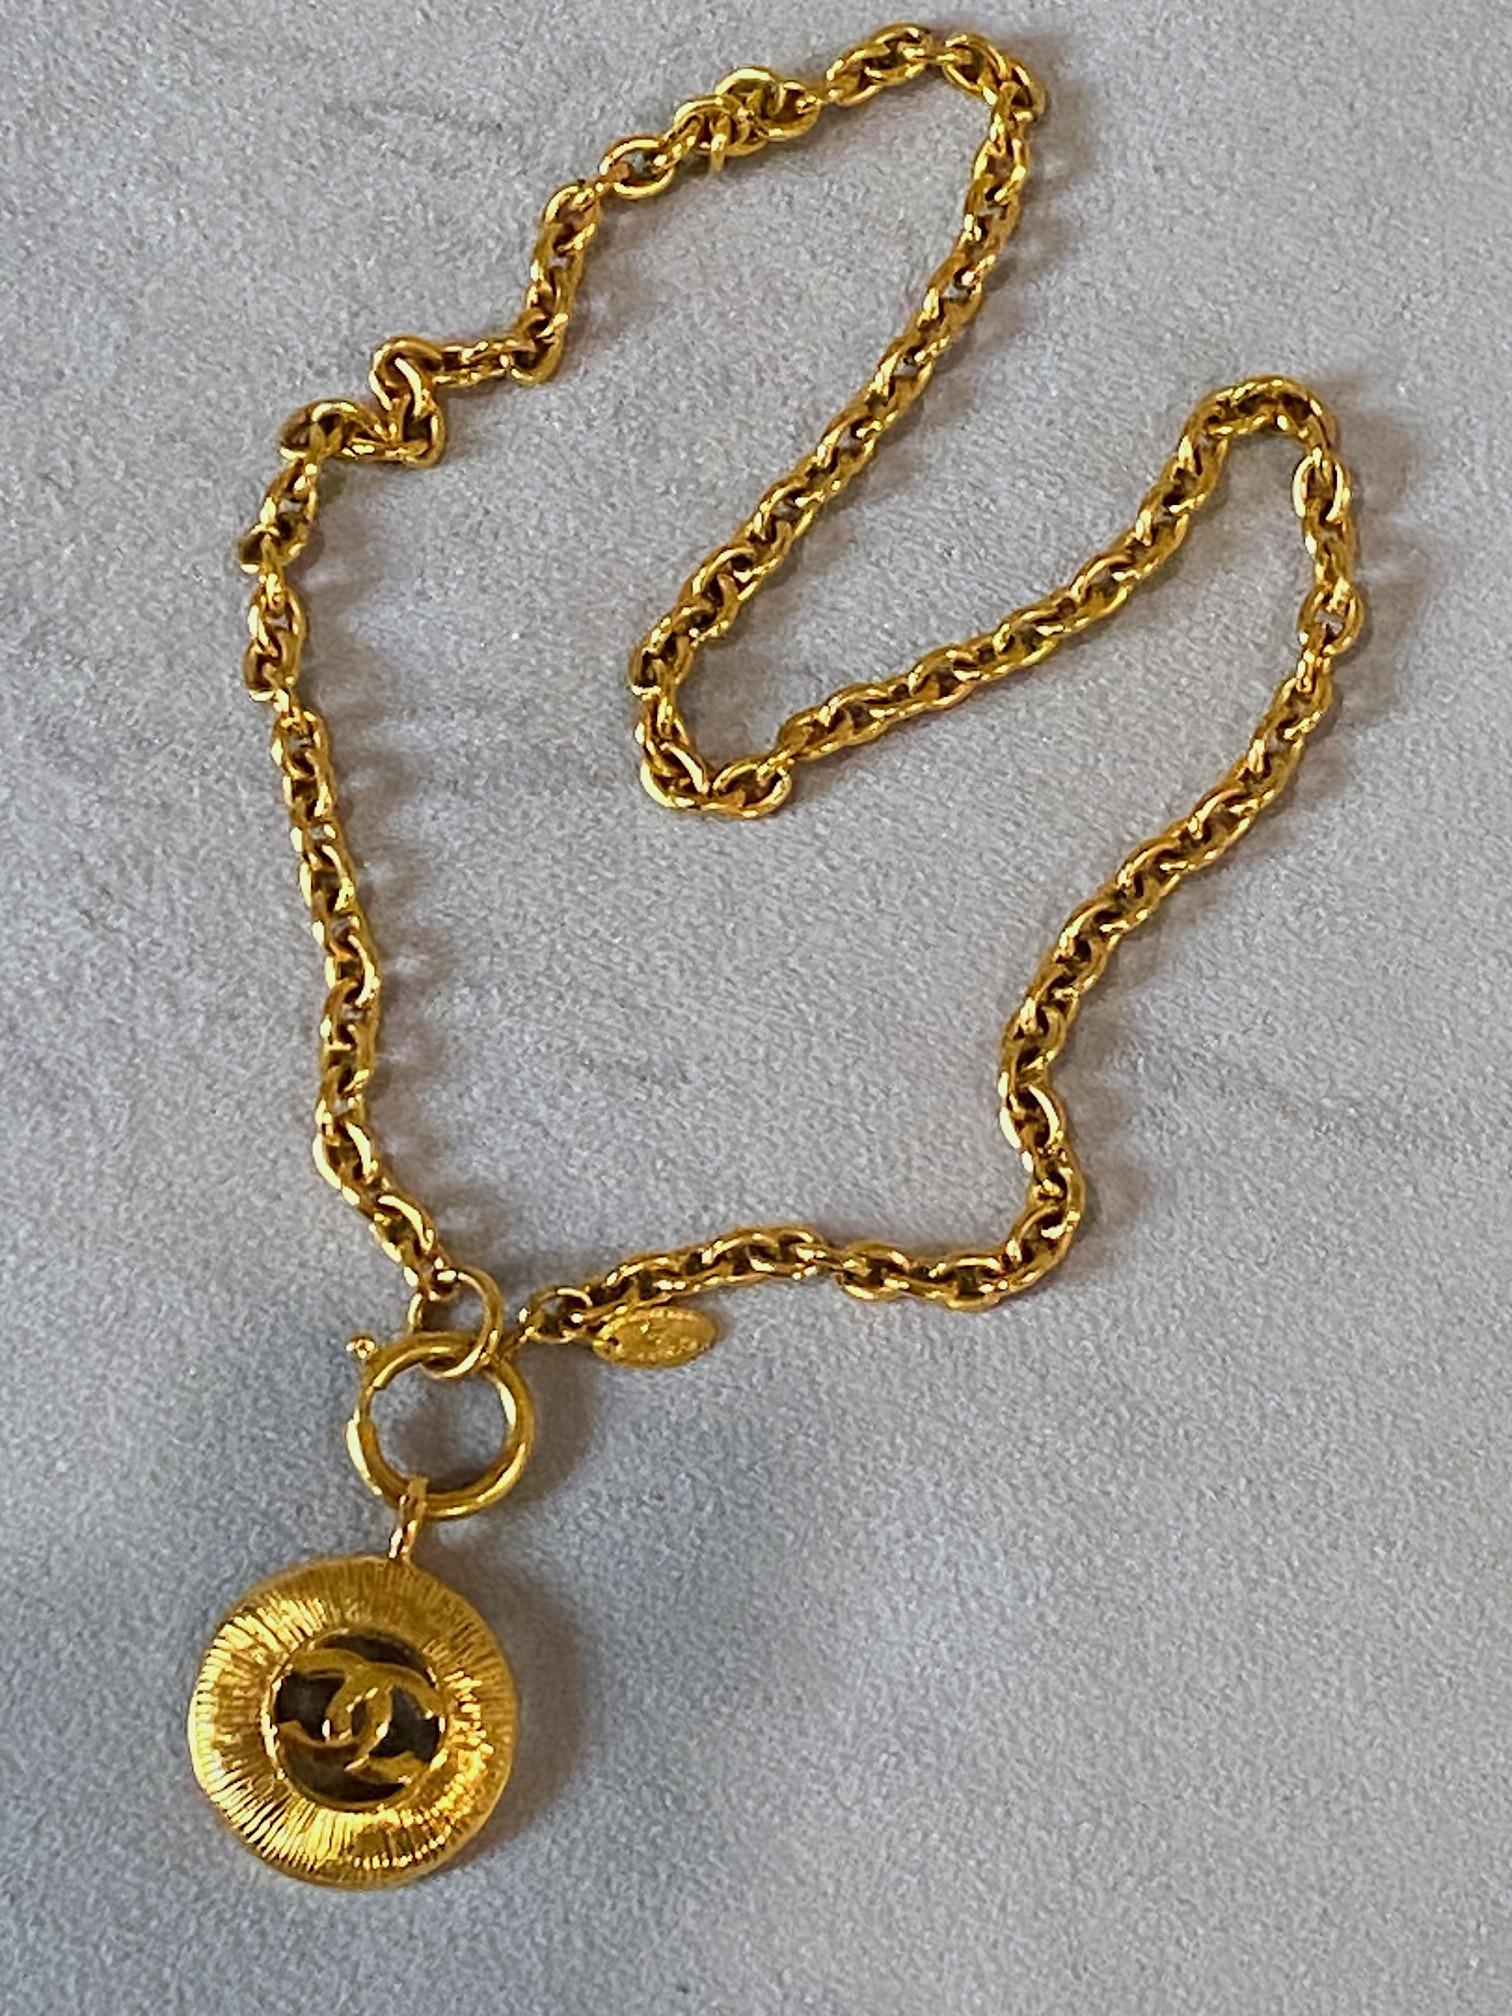 A classic design by Chanel from the 1980s is the gold tone domed pendant necklace. The chain is an oval cable link a quarter of an inch wide and 23 inches long including the large jump ring. The round pendant is 1.19 inches in diameter and 1.5 